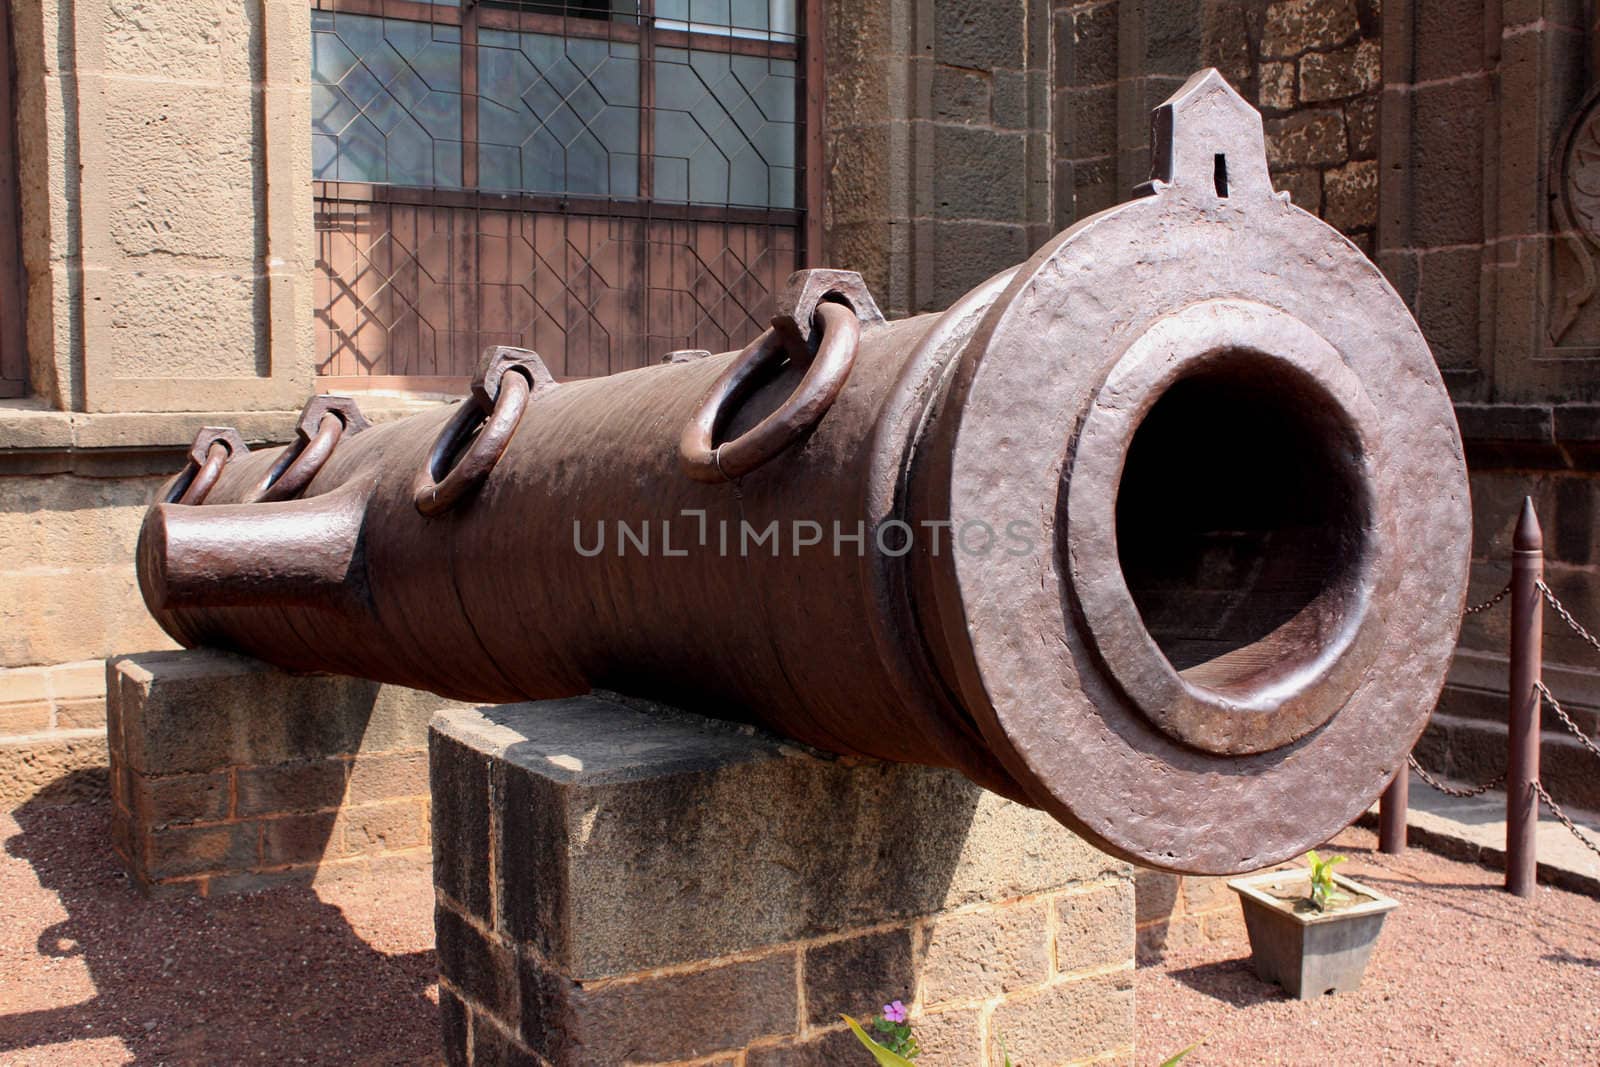 An ancient cannon outside an Indian fort.